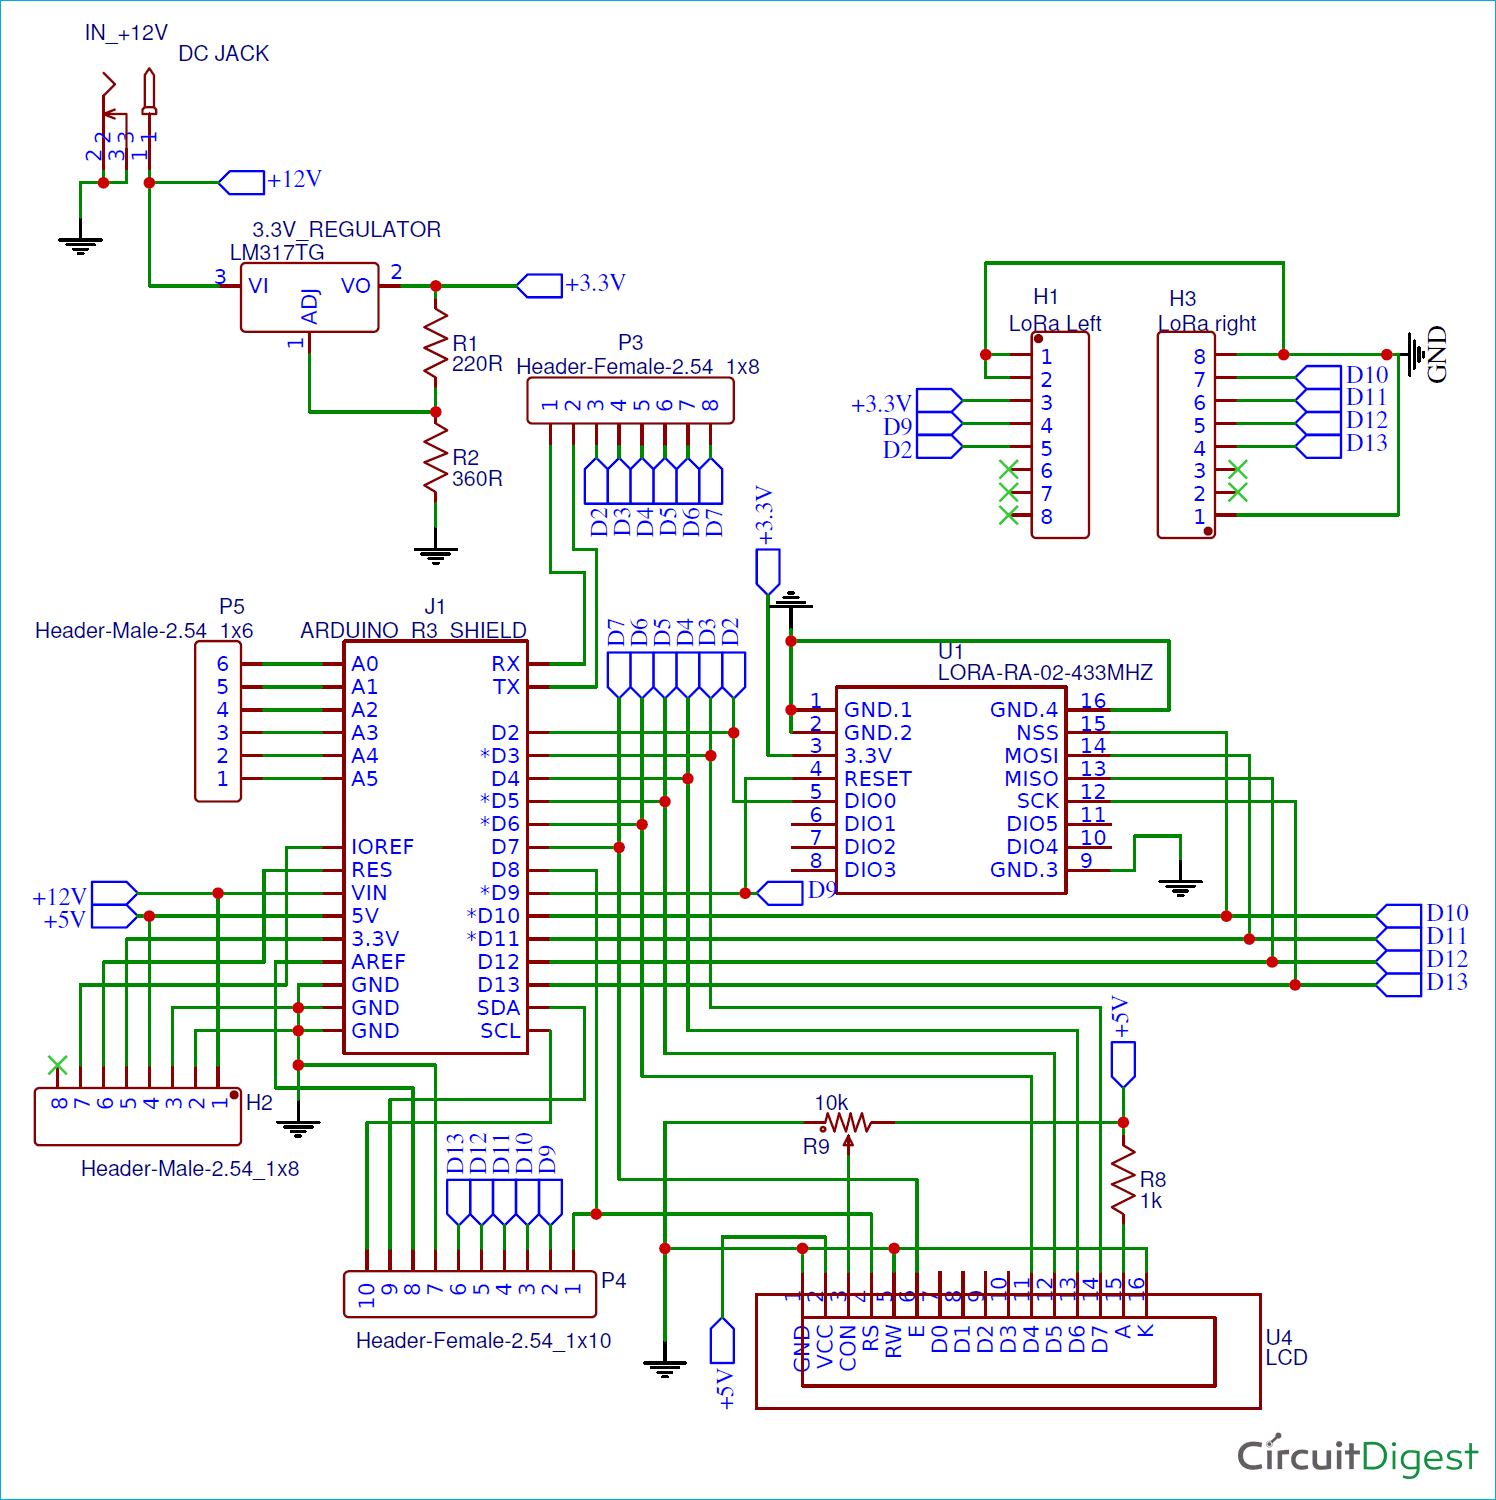 Circuit Diagram for Lora Based GPS Tracker using Arduino and LoRa Shield